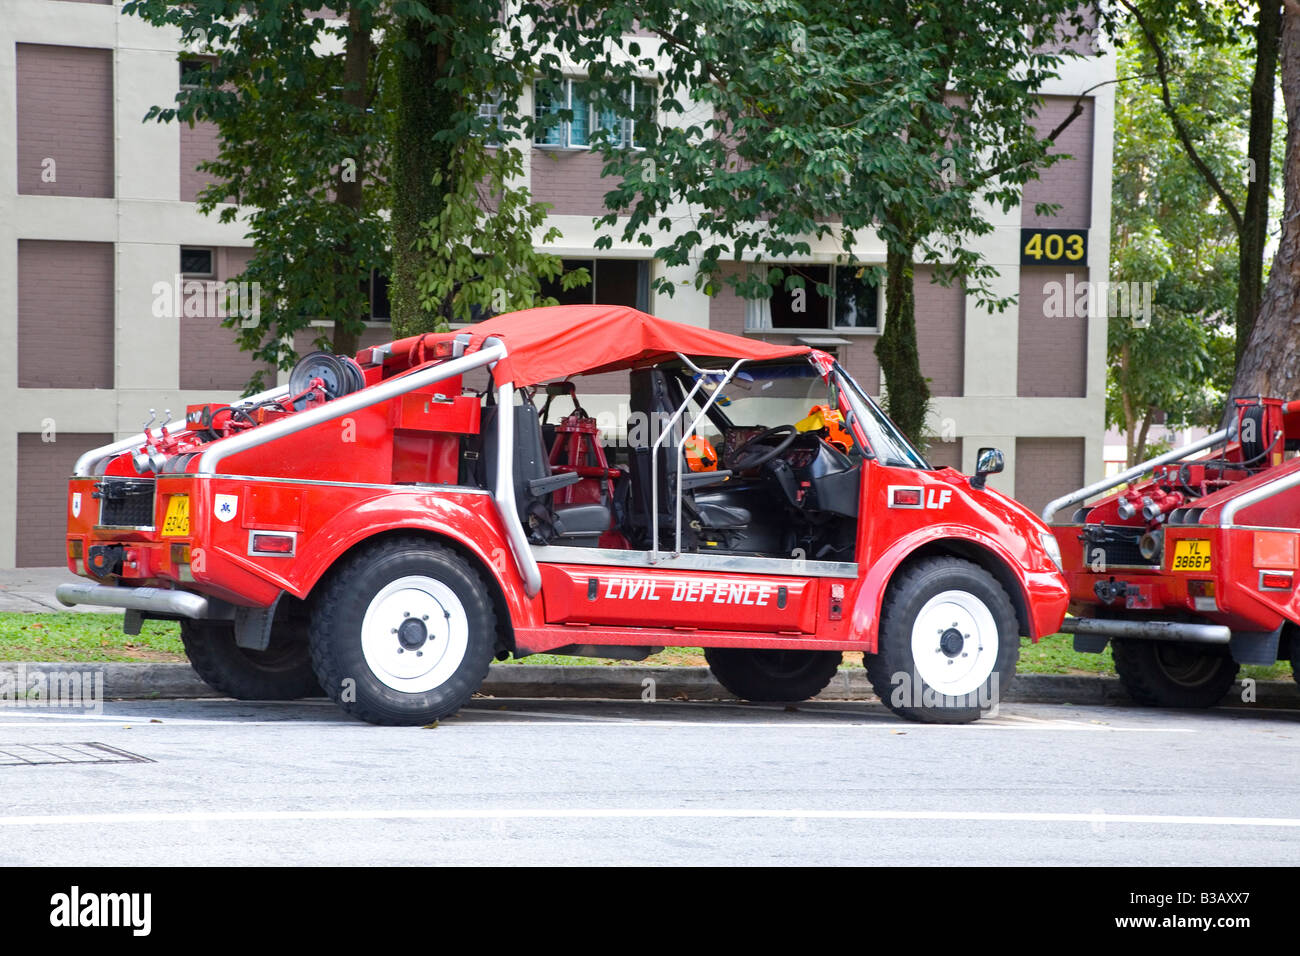 Fire engine in Singapore Stock Photo